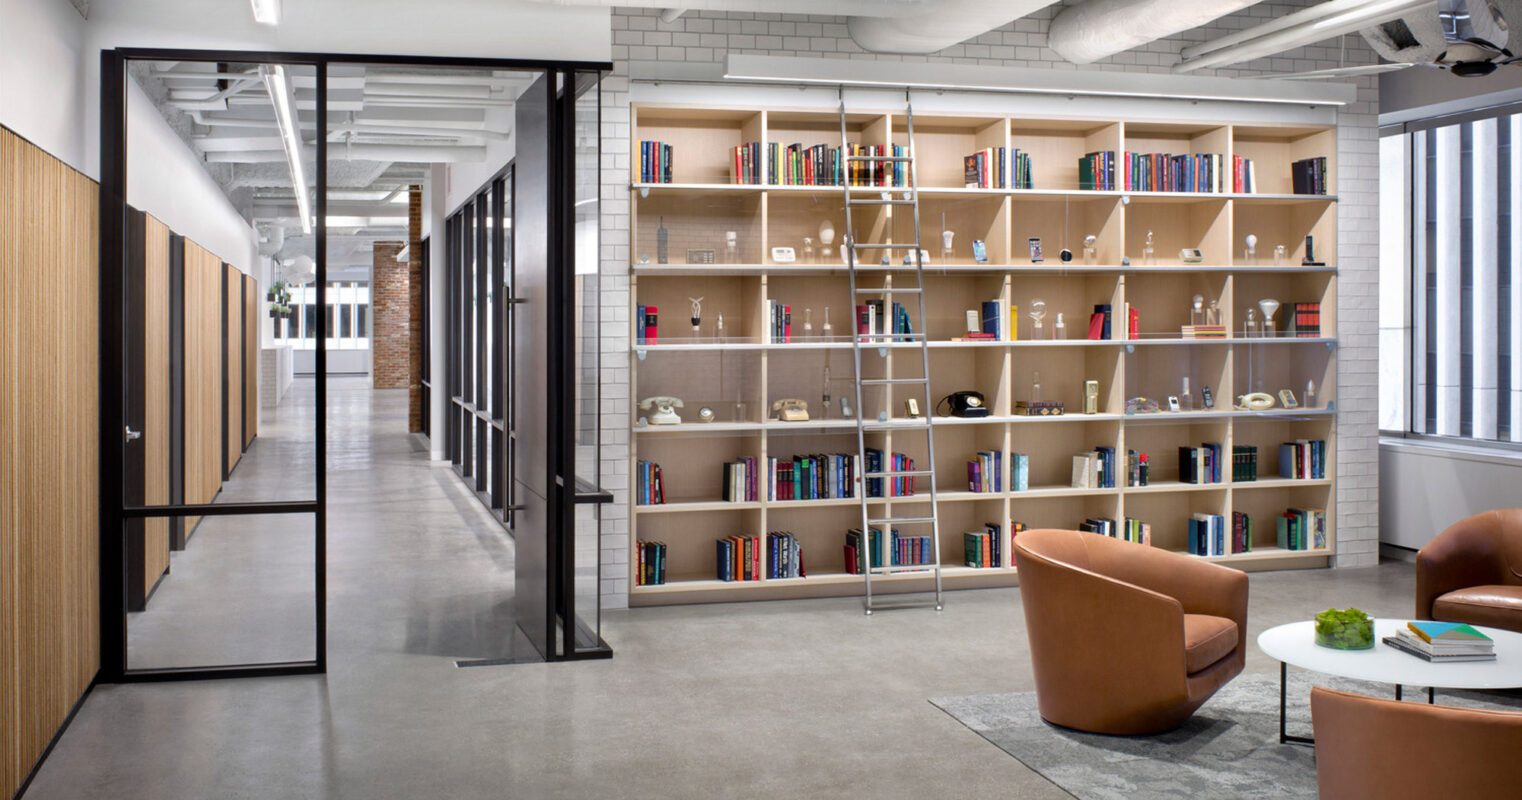 Open-plan office featuring a neutral color palette with natural wood accents, black-framed glass partitions, and an extensive wall-mounted bookshelf. Mid-century modern seating and industrial-style lighting complement the contemporary feel of the space.